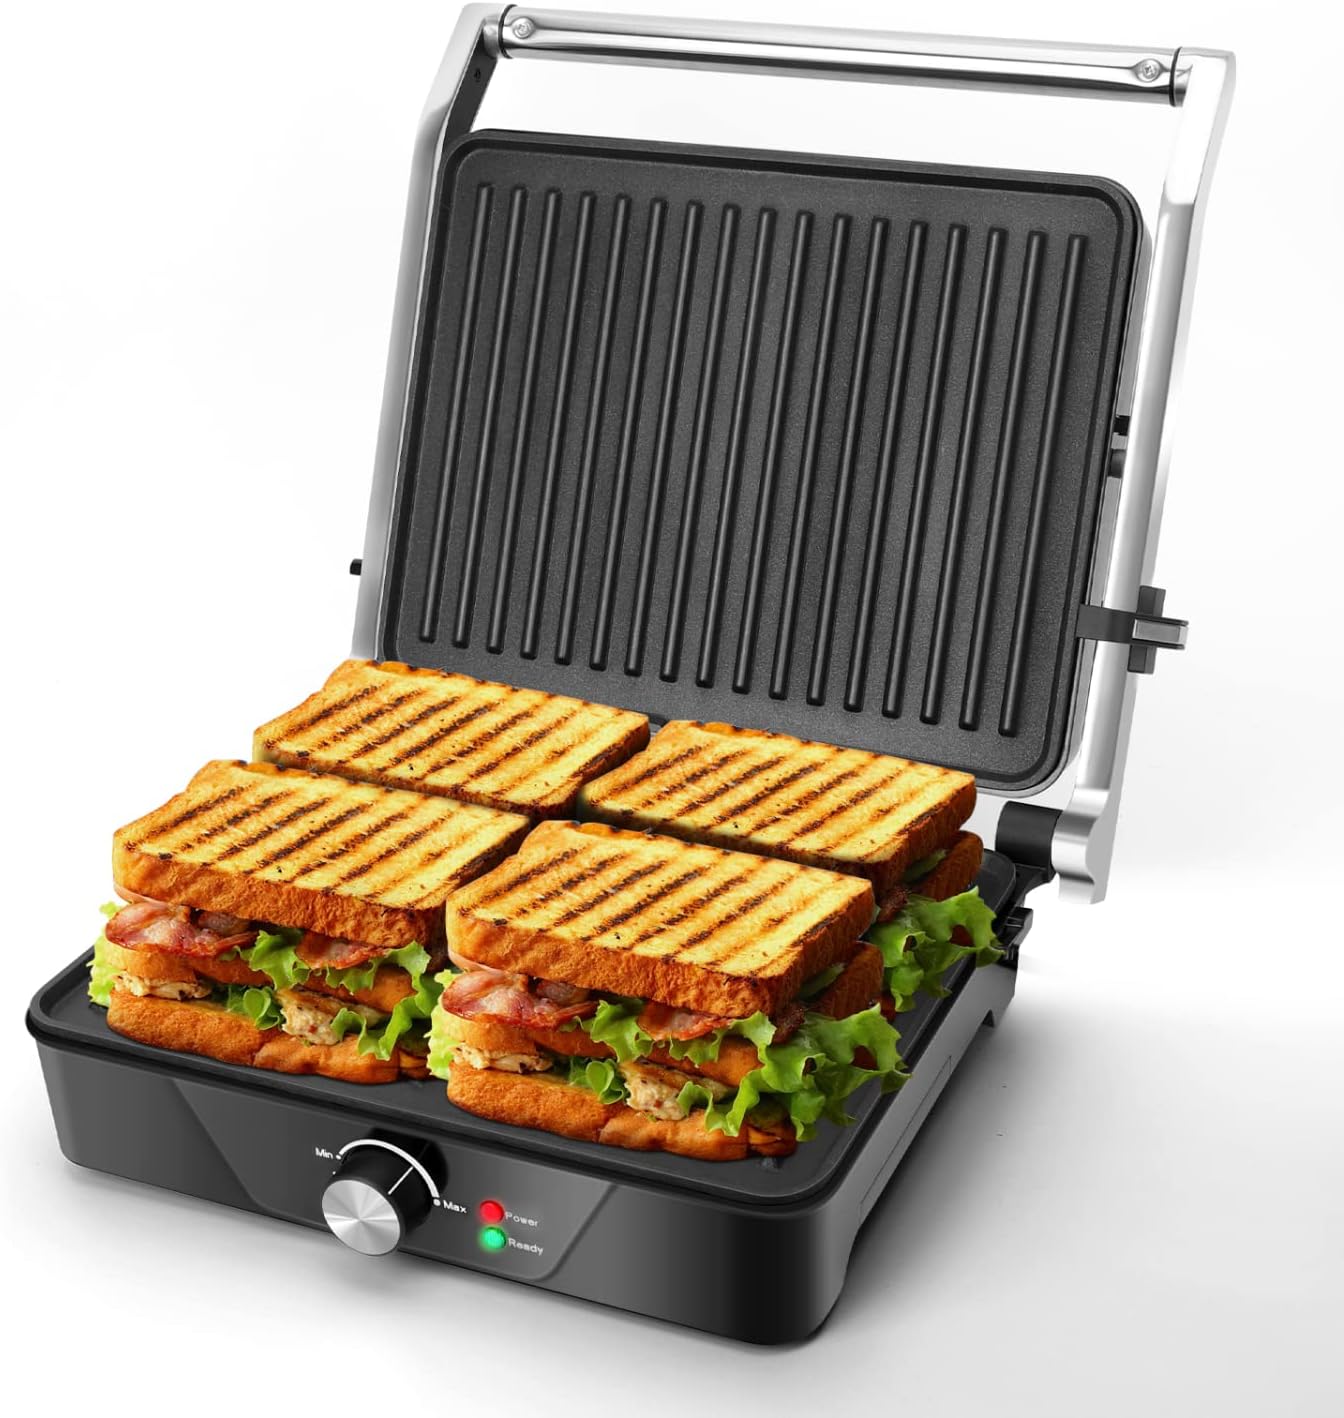 Aigostar SAM- XL Contact Grill, Panini Grill, Sandwich Maker, 2000 W Non-Stick Coated Grill Plates, Low-Fat Grilling, Panini, Toasts, Steak, Vegetables, Stainless Steel, 30 cm x 20 cm